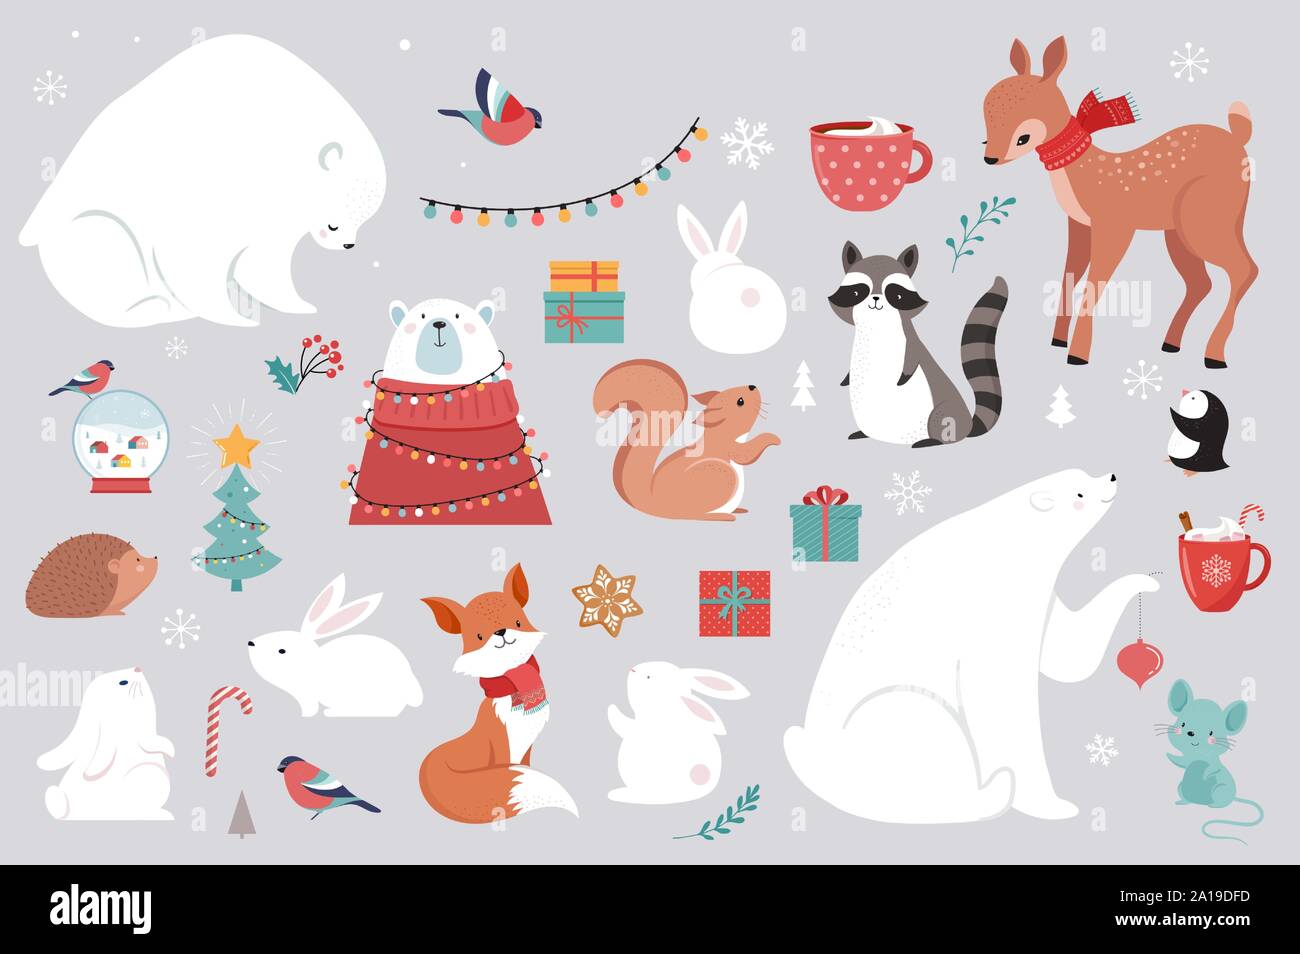 Winter forest animals, Merry Christmas greeting cards, posters with cute bear, birds, bunny, deer, mouse and penguin.  Stock Vector